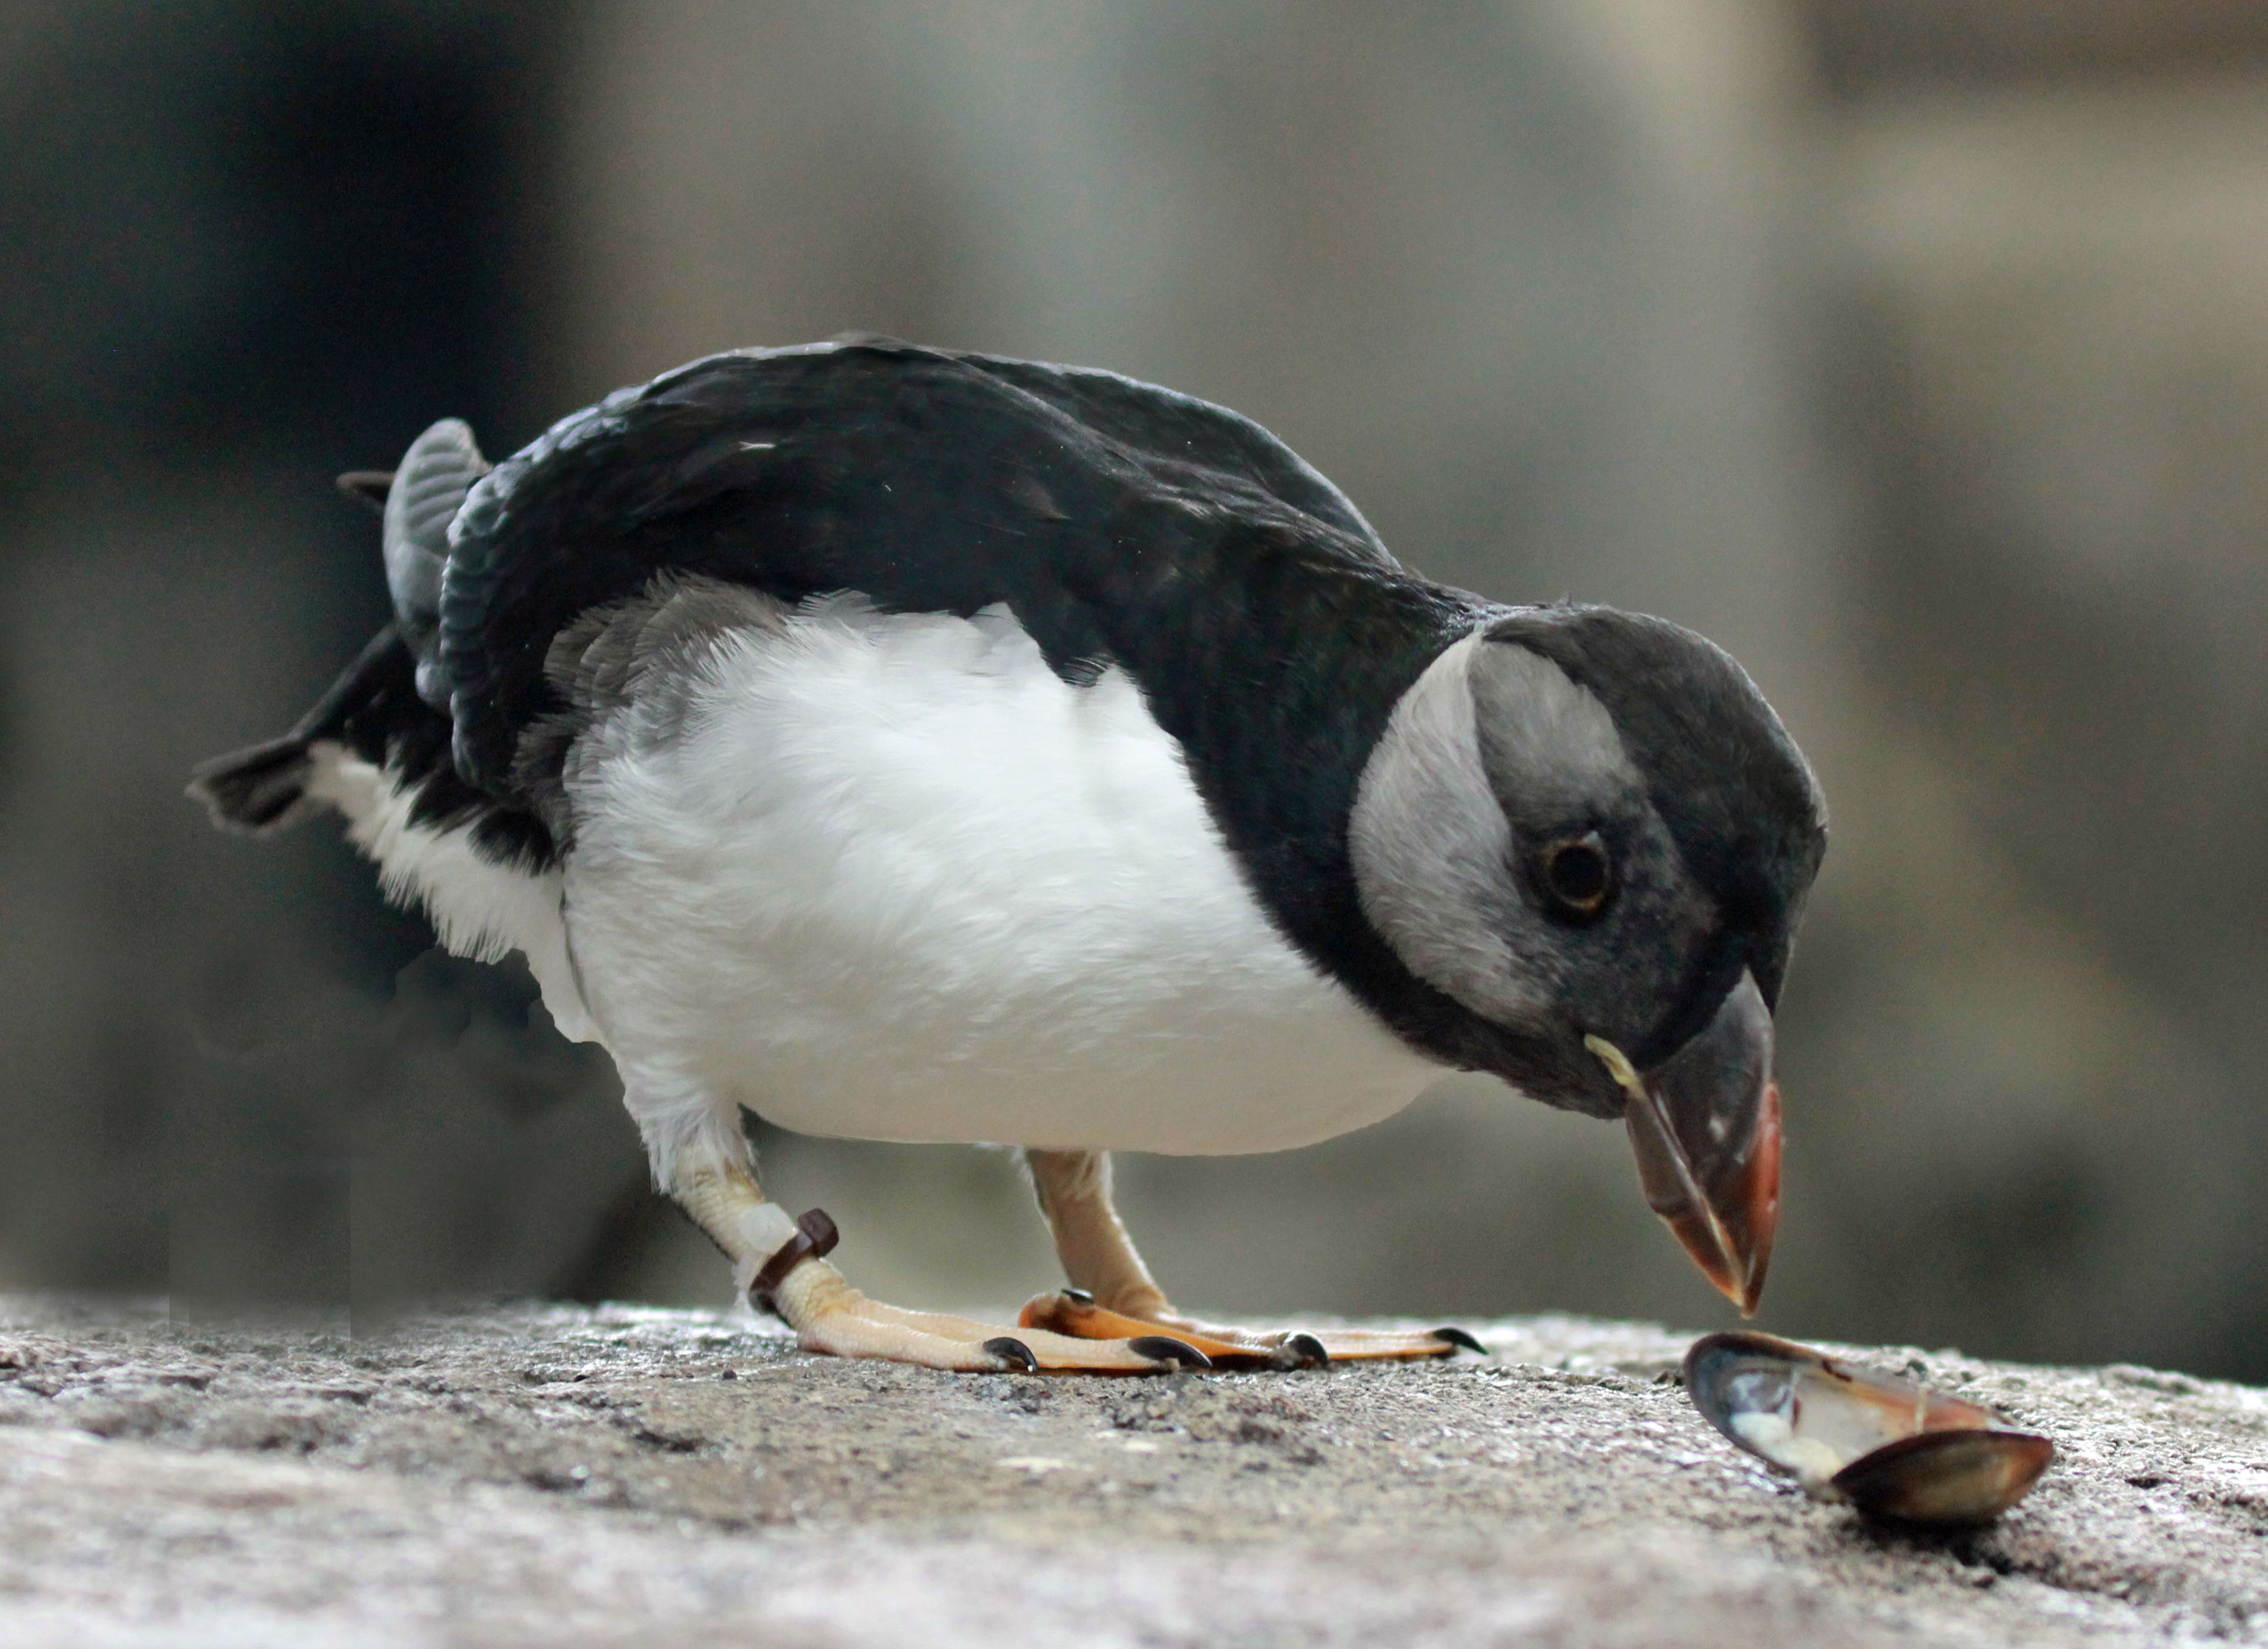 Horned puffin - Wikipedia